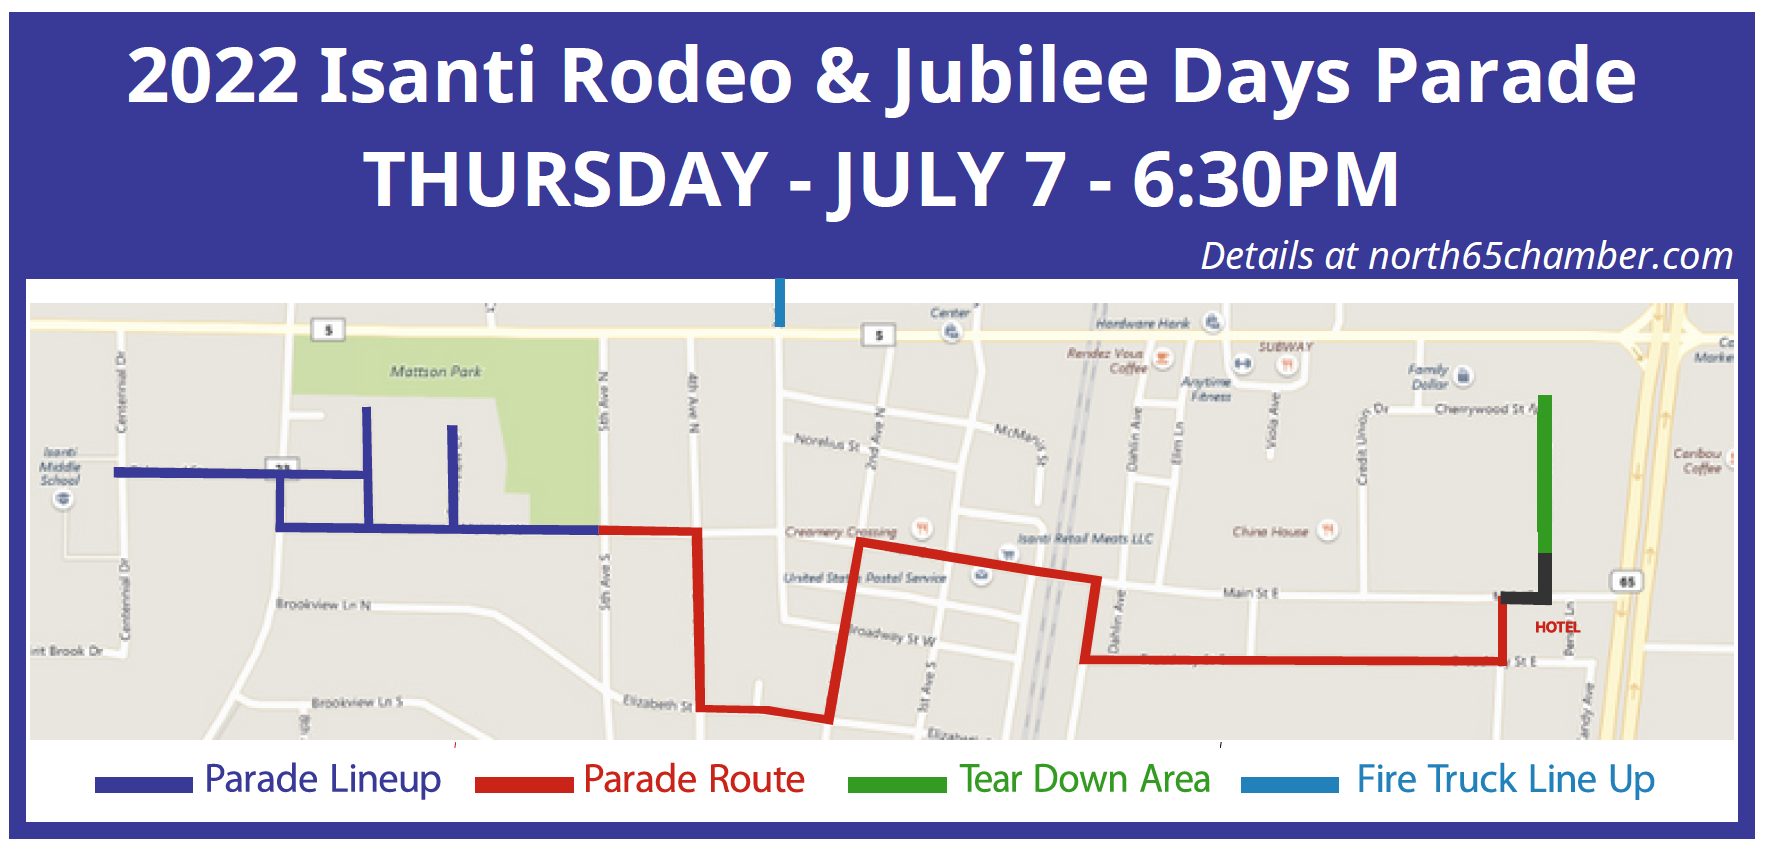 2022 Parade Route Map